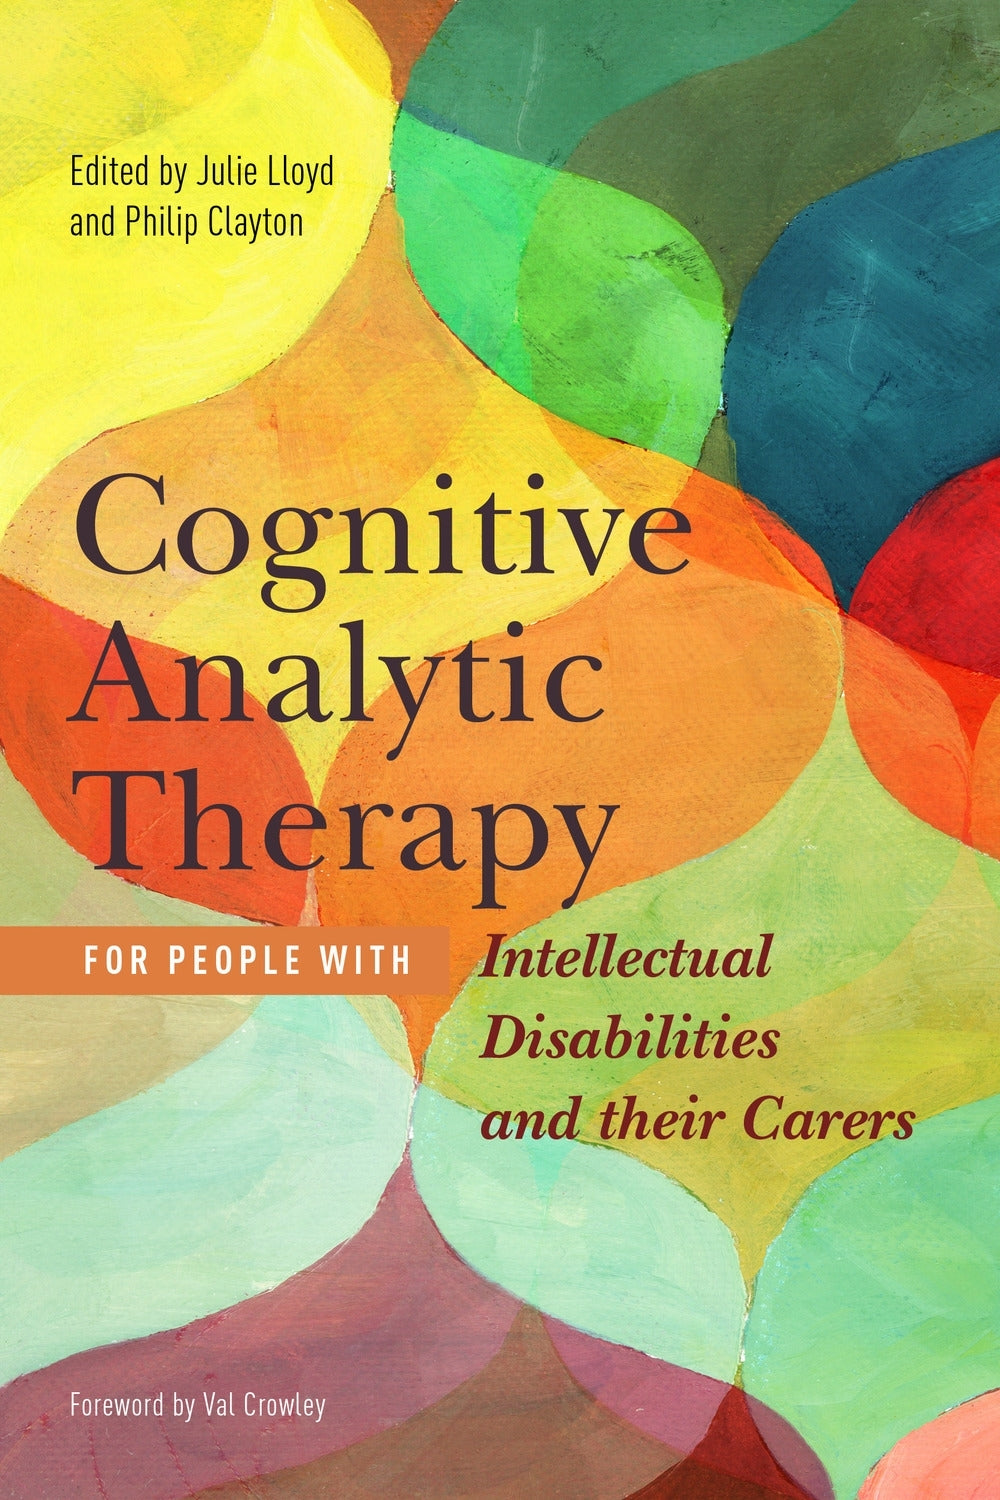 Cognitive Analytic Therapy for People with Intellectual Disabilities and their Carers by Phil Clayton, Julie Lloyd, Val Crowley, No Author Listed